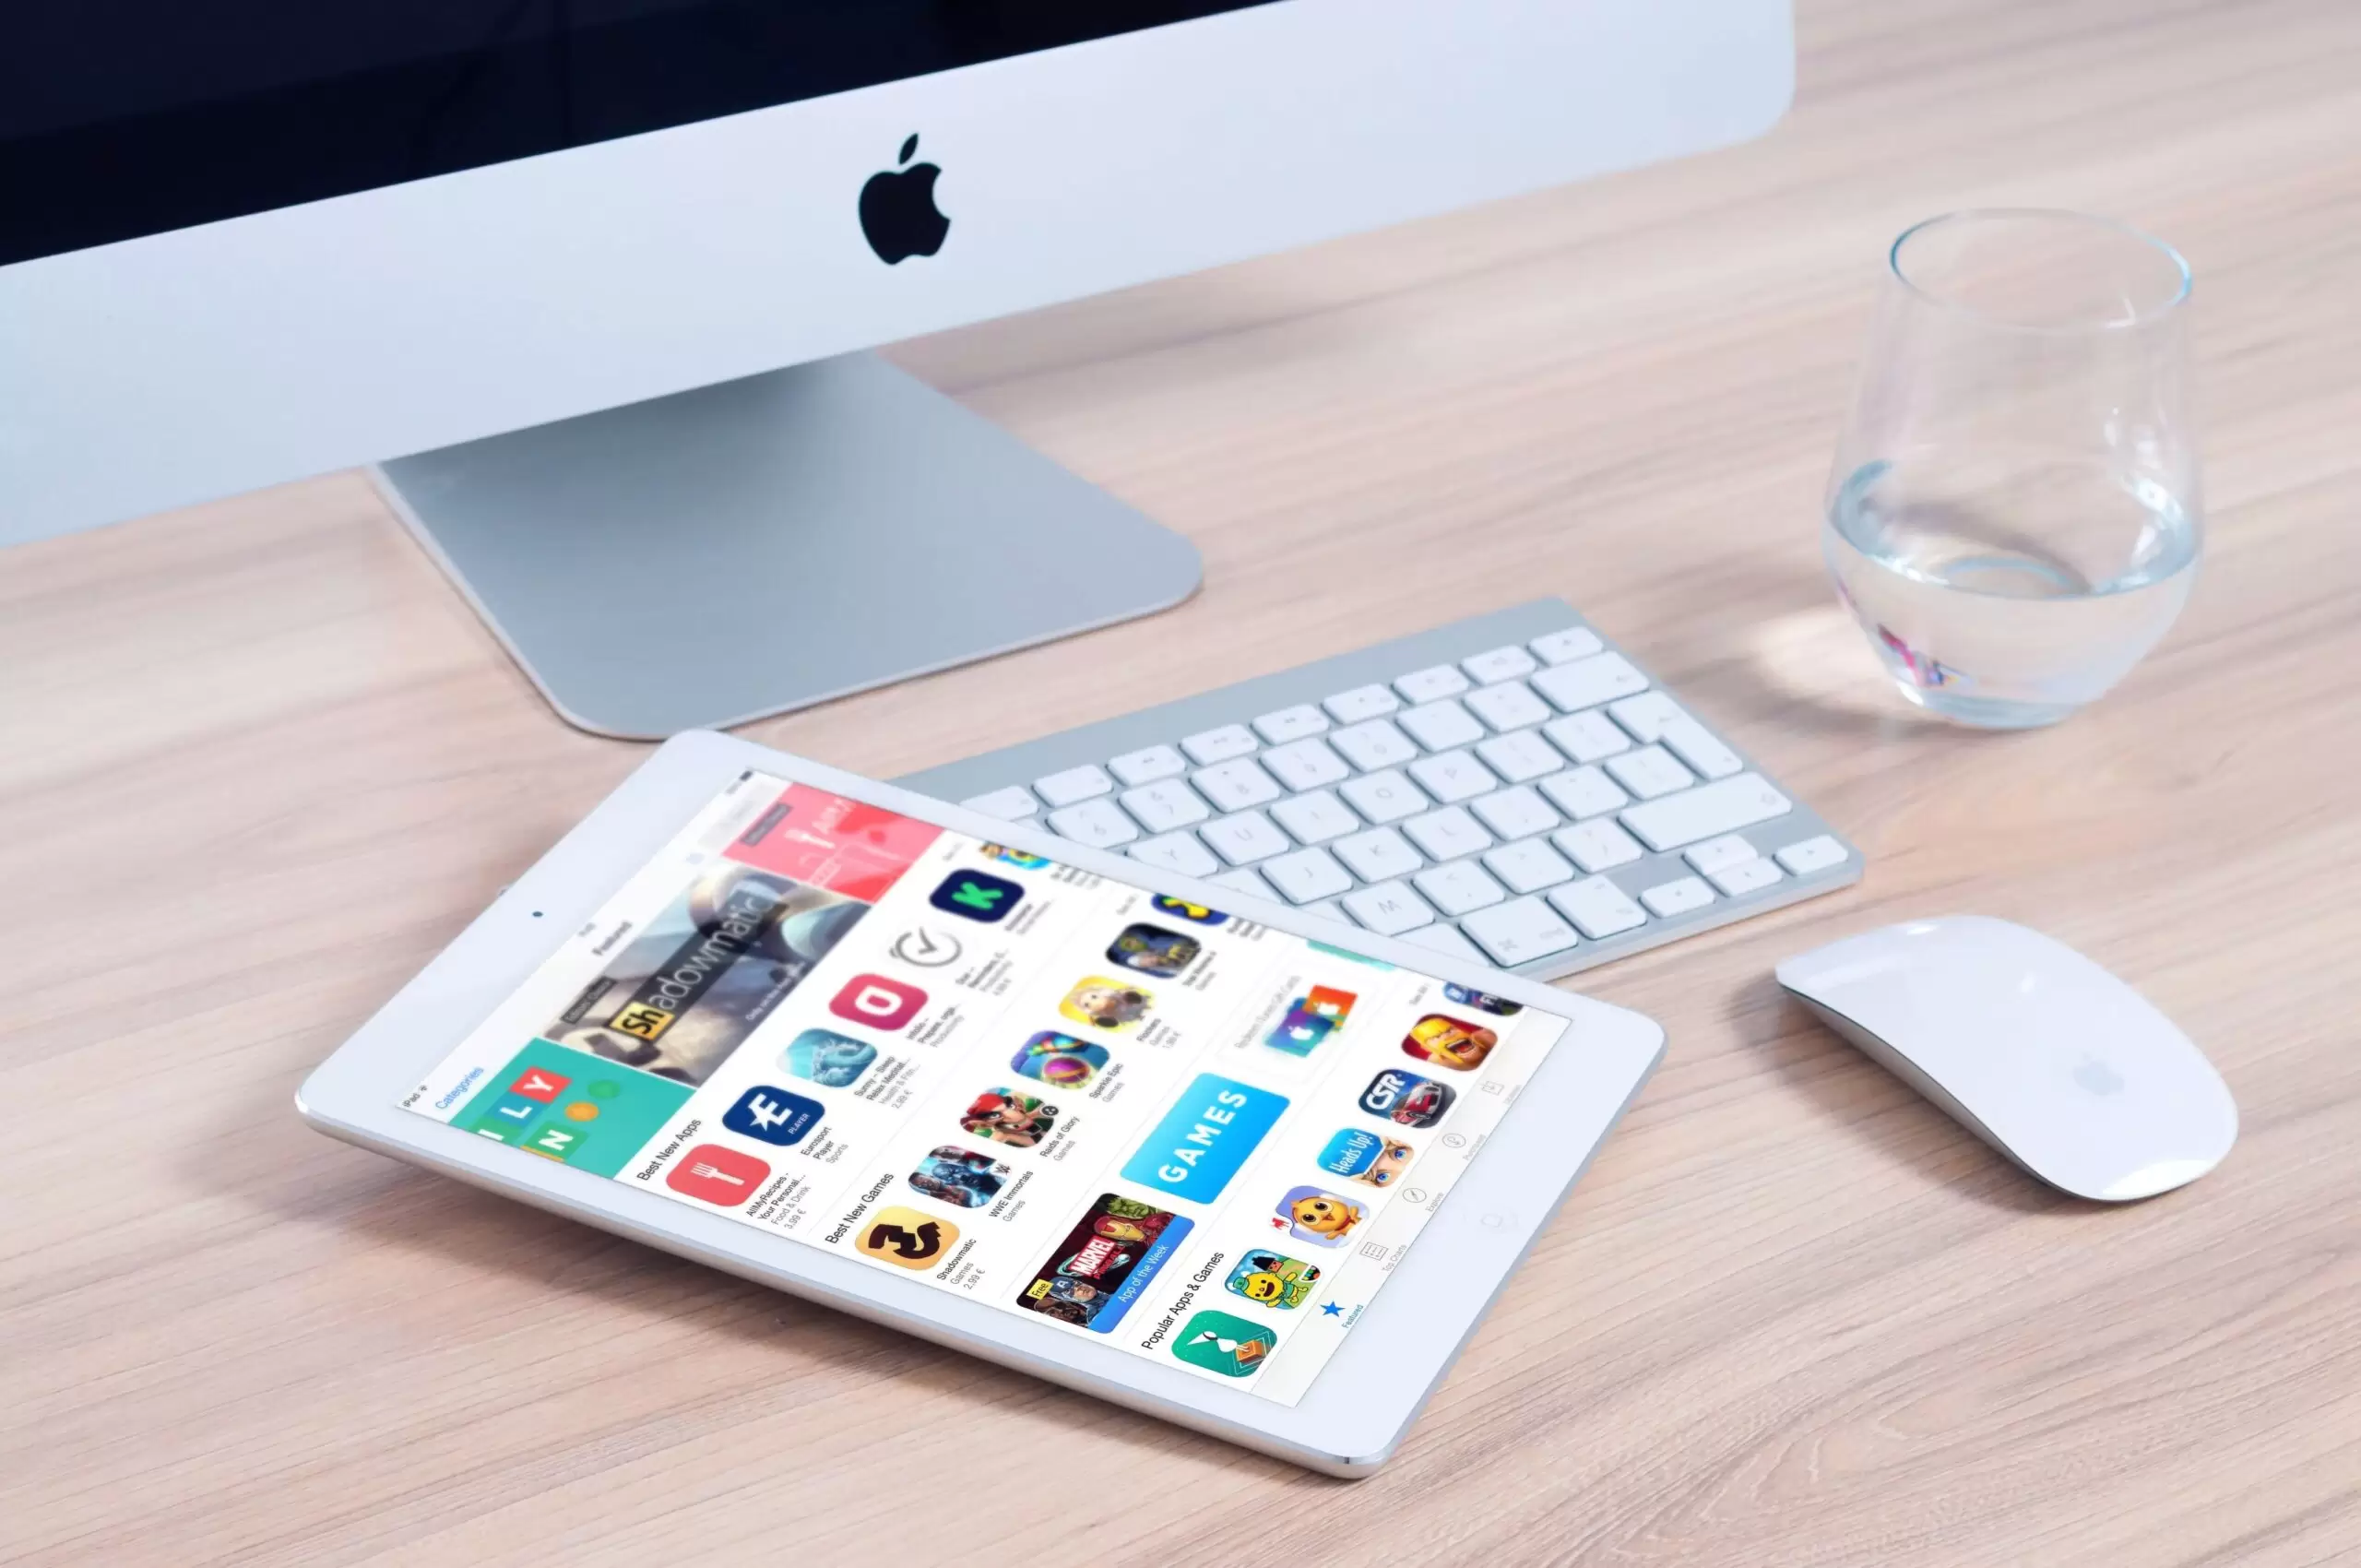 Study More Effectively With These Innovative Apps and Websites